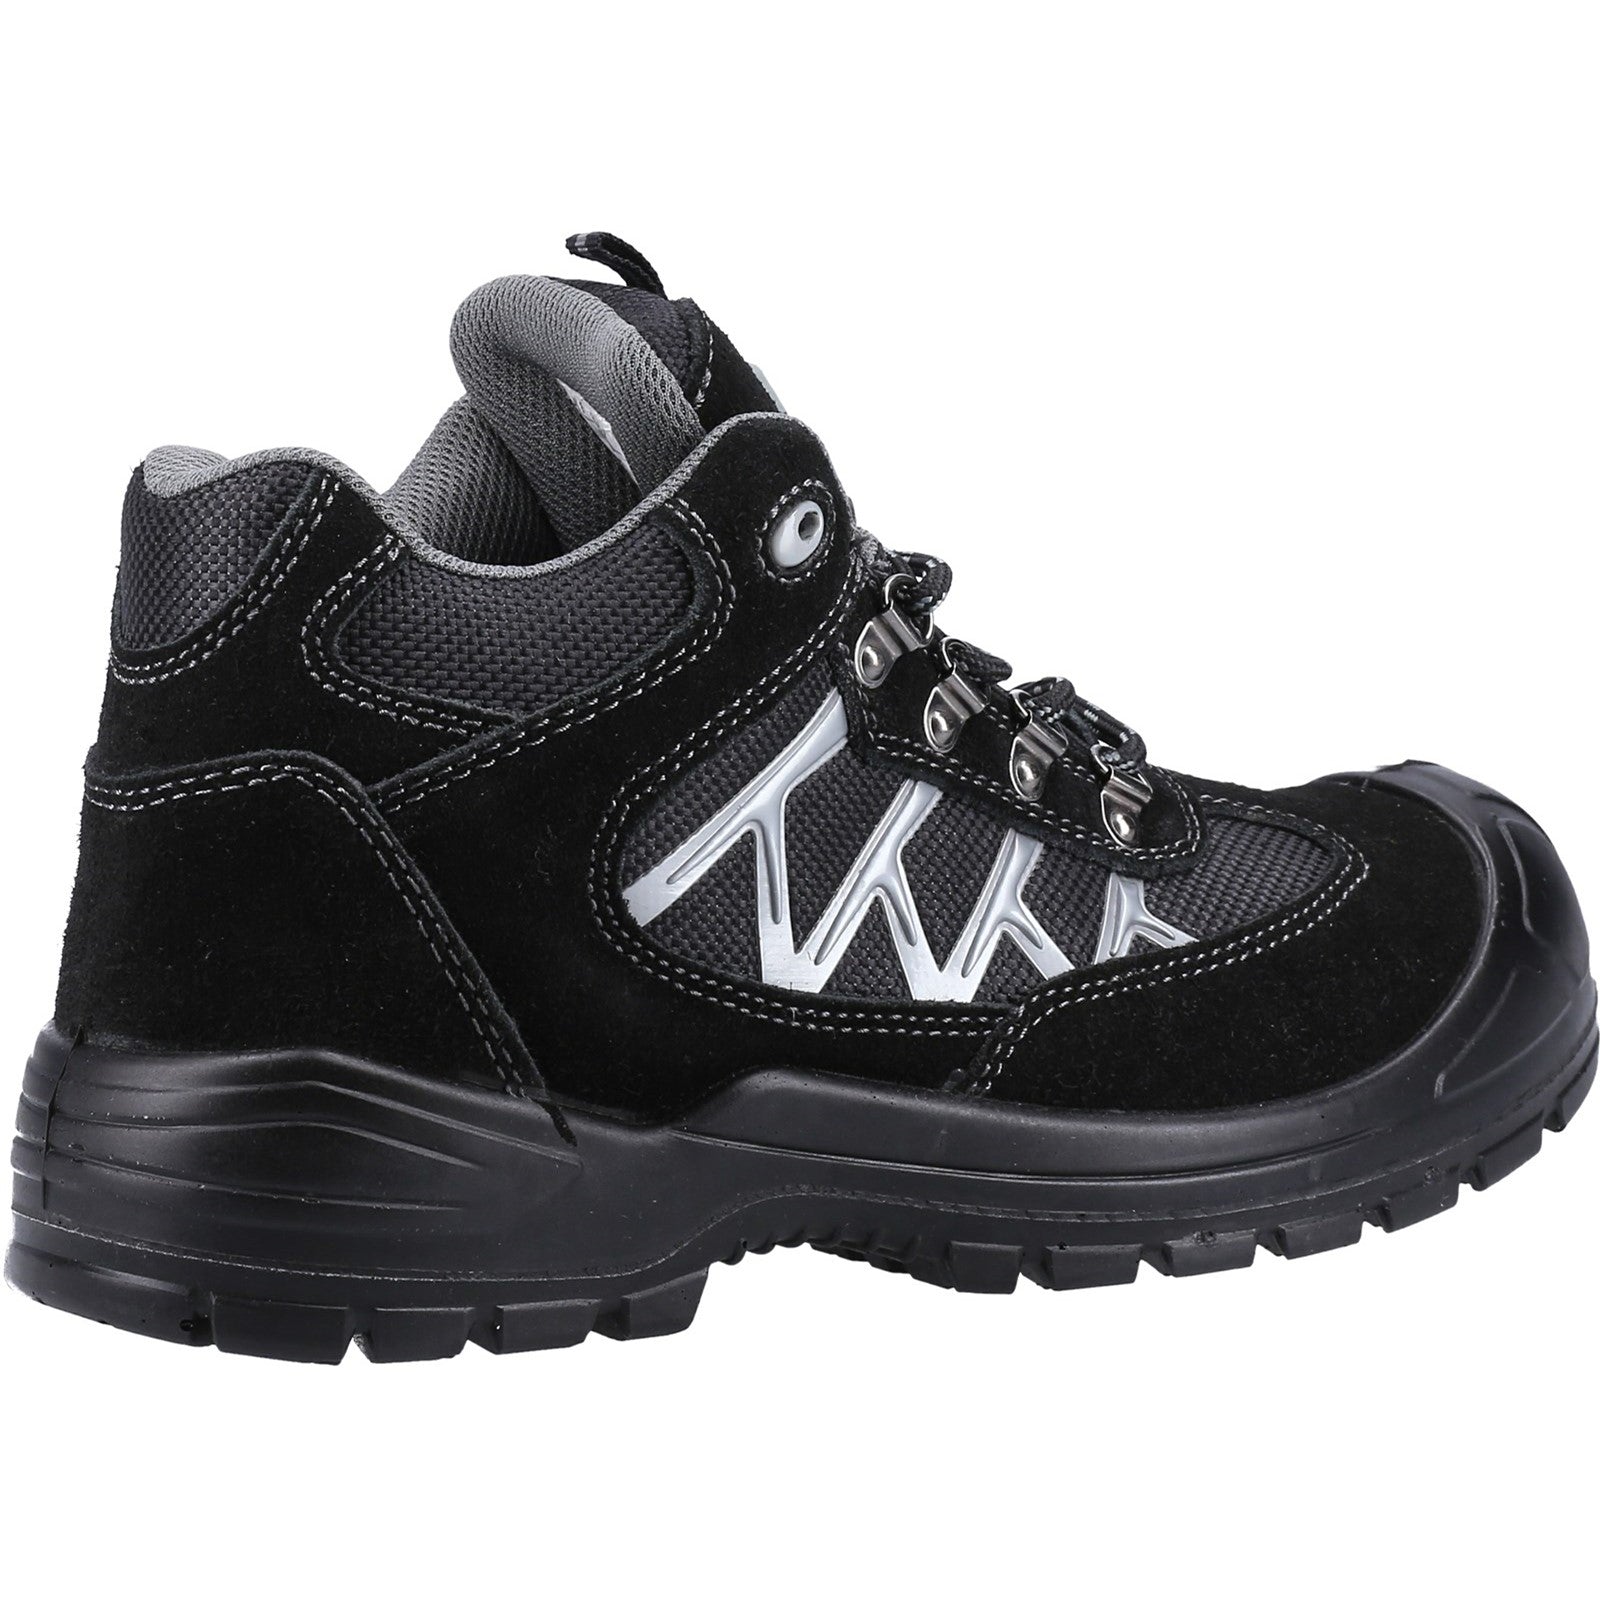 Amblers 255 Safety Boot